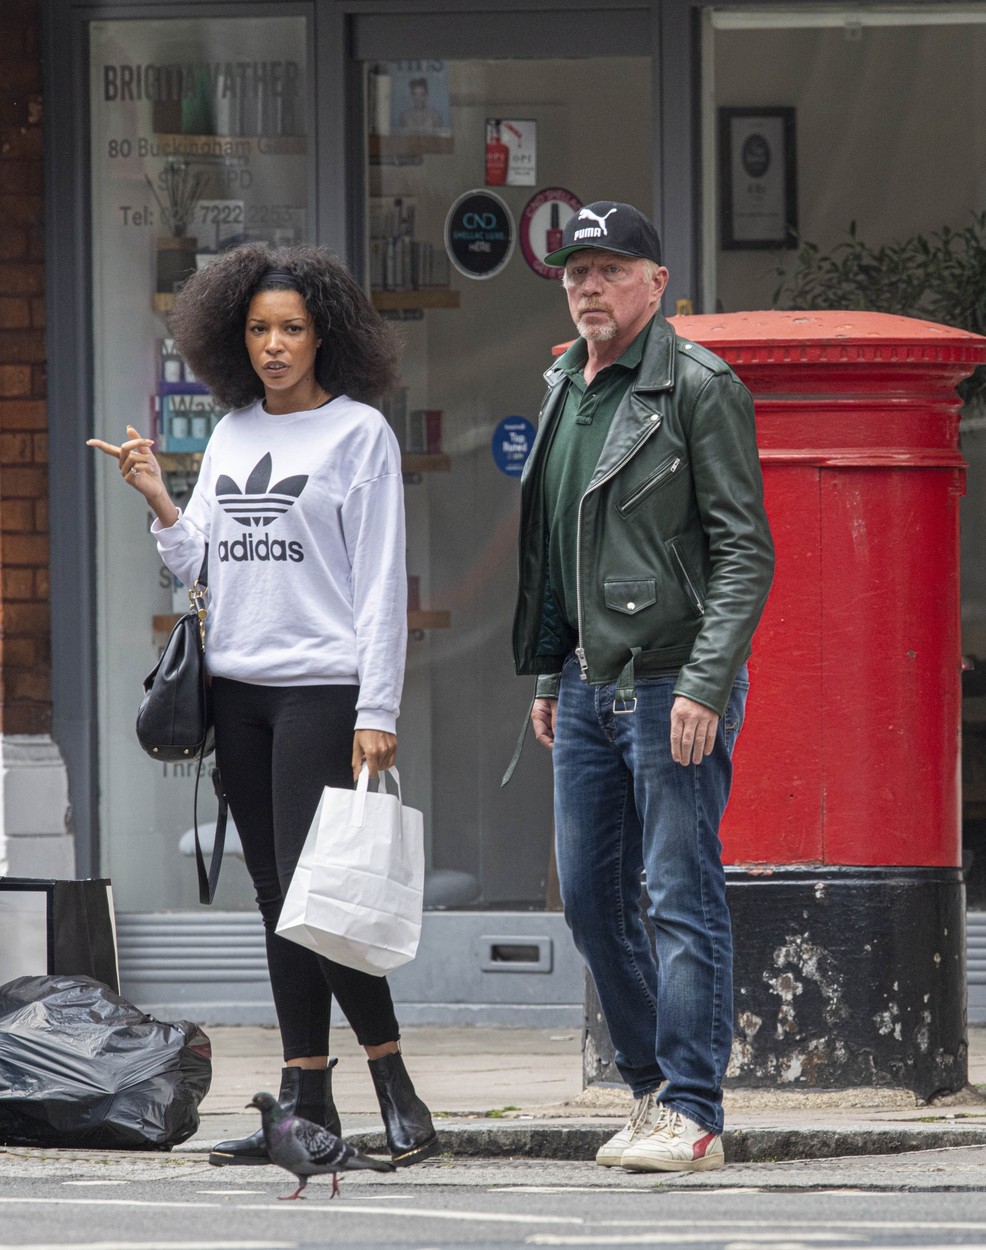 London, UNITED KINGDOM  - *EXCLUSIVE*  - NOT AVAILABLE FOR DAILY MAIL ONLINE OR ANY OTHER UK SITES - STRICTLY NOT AVAILABLE FOR ANY SUBSCRIPTION DEALS - NOT AVAILABLE FOR UK MAGAZINES - 

Boris Becker places his hand on new love Lily Monteiro's waist as he takes a trip to the dentist! Boris seems to be madly in love after moving on swiftly from Yoana. Yoana has been putting up some quotes on Instagram that show she may be slightly unsettled by the news of Boris's new love. Up until very recently Yoana was liking posts of Boris's which may also show that it has come as a surprise to her that Boris has moved on.

Pictures take 11 June 2020

*STRICTLY NOT AVAILABLE FOR ANY SUBSCRIPTION DEALS*

*UK Clients - Pictures Containing Children
Please Pixelate Face Prior To Publication*,Image: 531806470, License: Rights-managed, Restrictions: RIGHTS: WORLDWIDE EXCEPT IN AUSTRIA, GERMANY, RUSSIA, SWITZERLAND, UNITED KINGDOM, Model Release: no, Pictured: Boris Becker, Lily Monteiro, Lilian de Carvalho Monteiro, Credit line: Profimedia